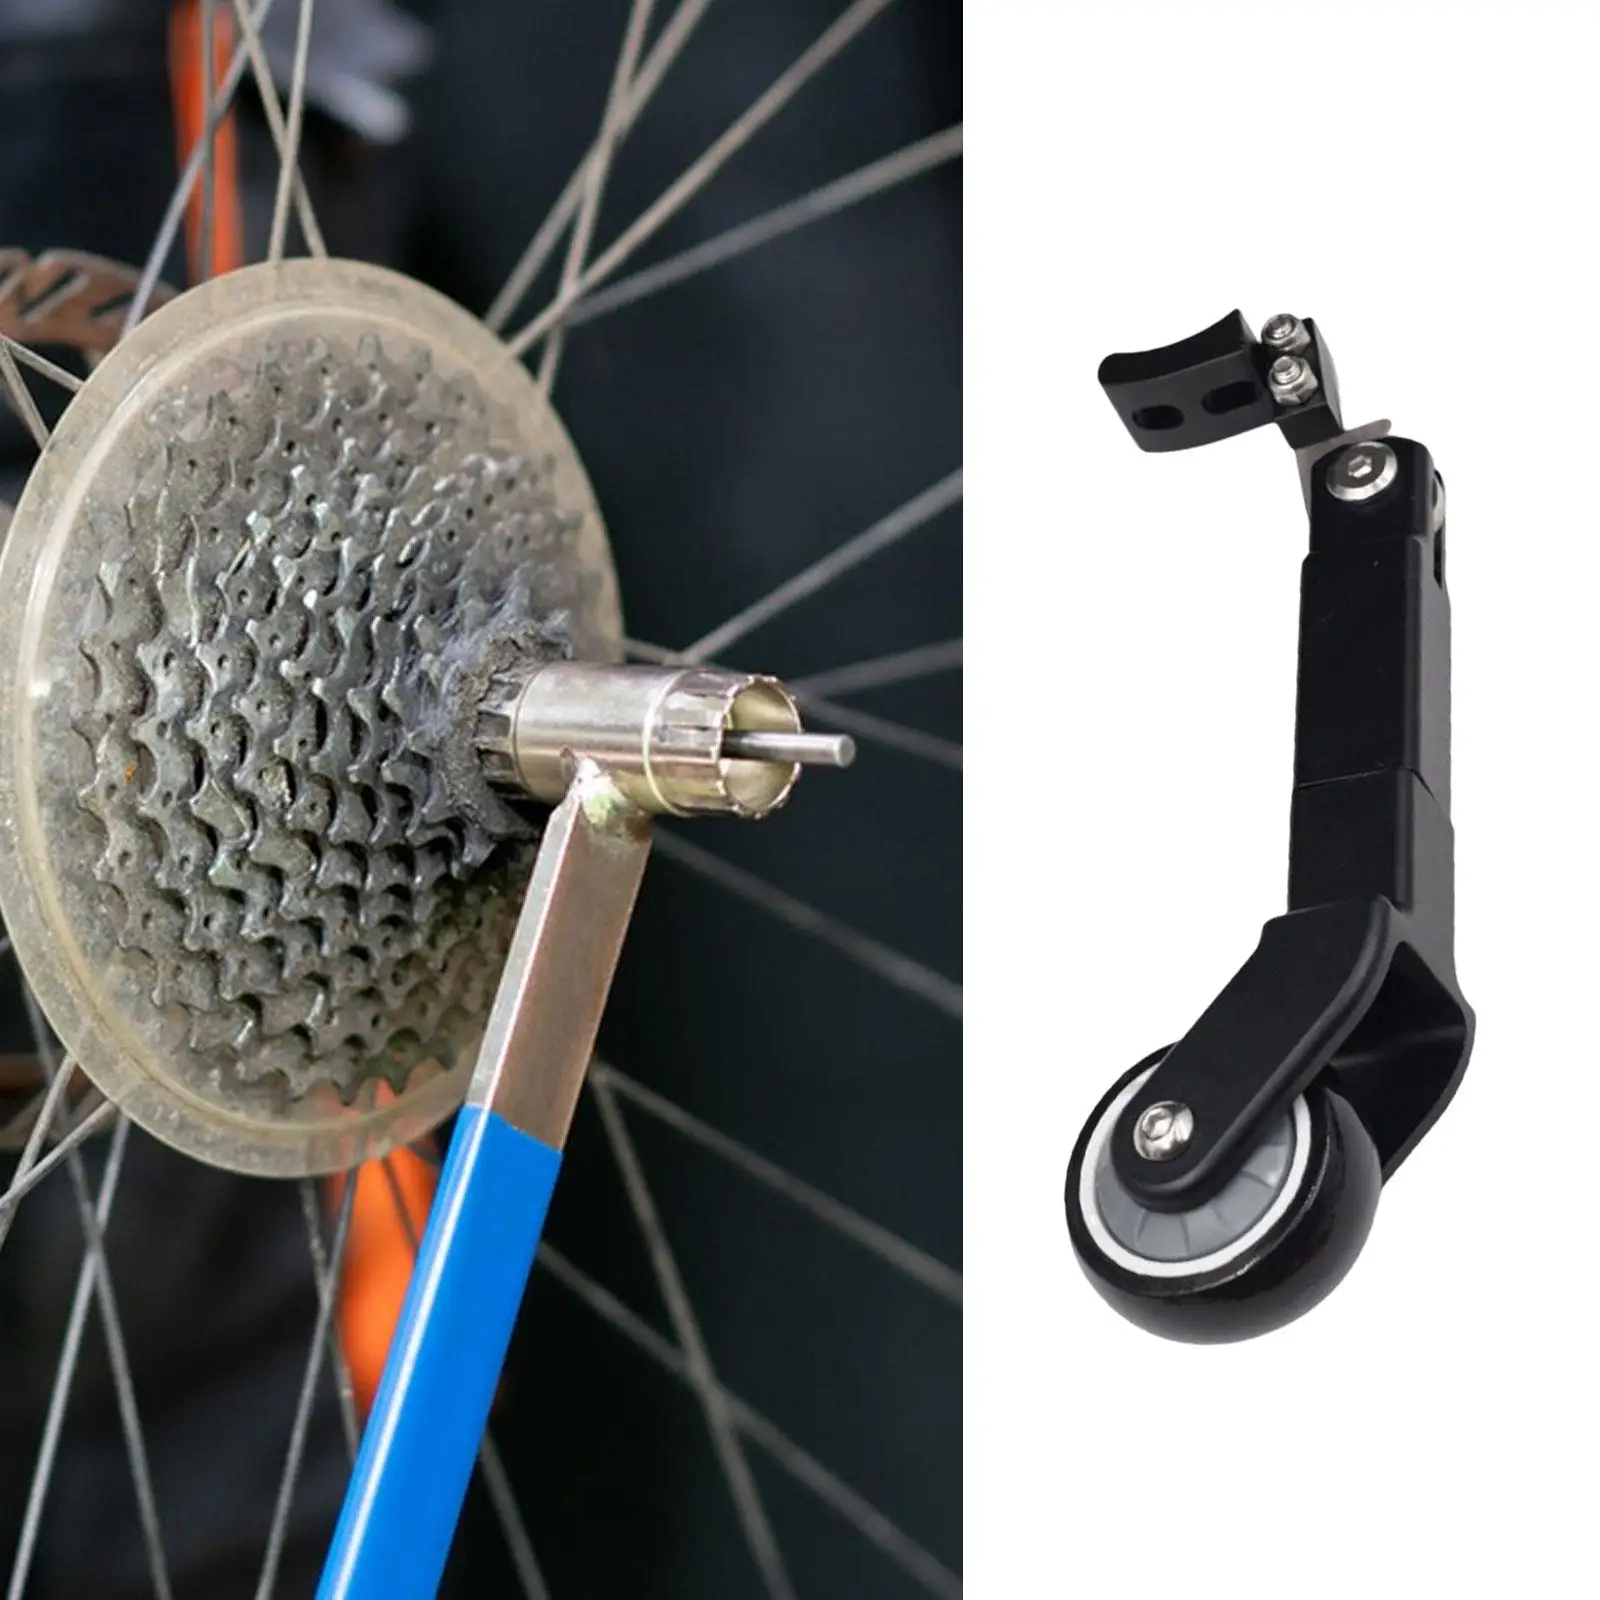 Bikes Easy to Push Wheel 360 Auxiliary Casters Caster for Folding Bike